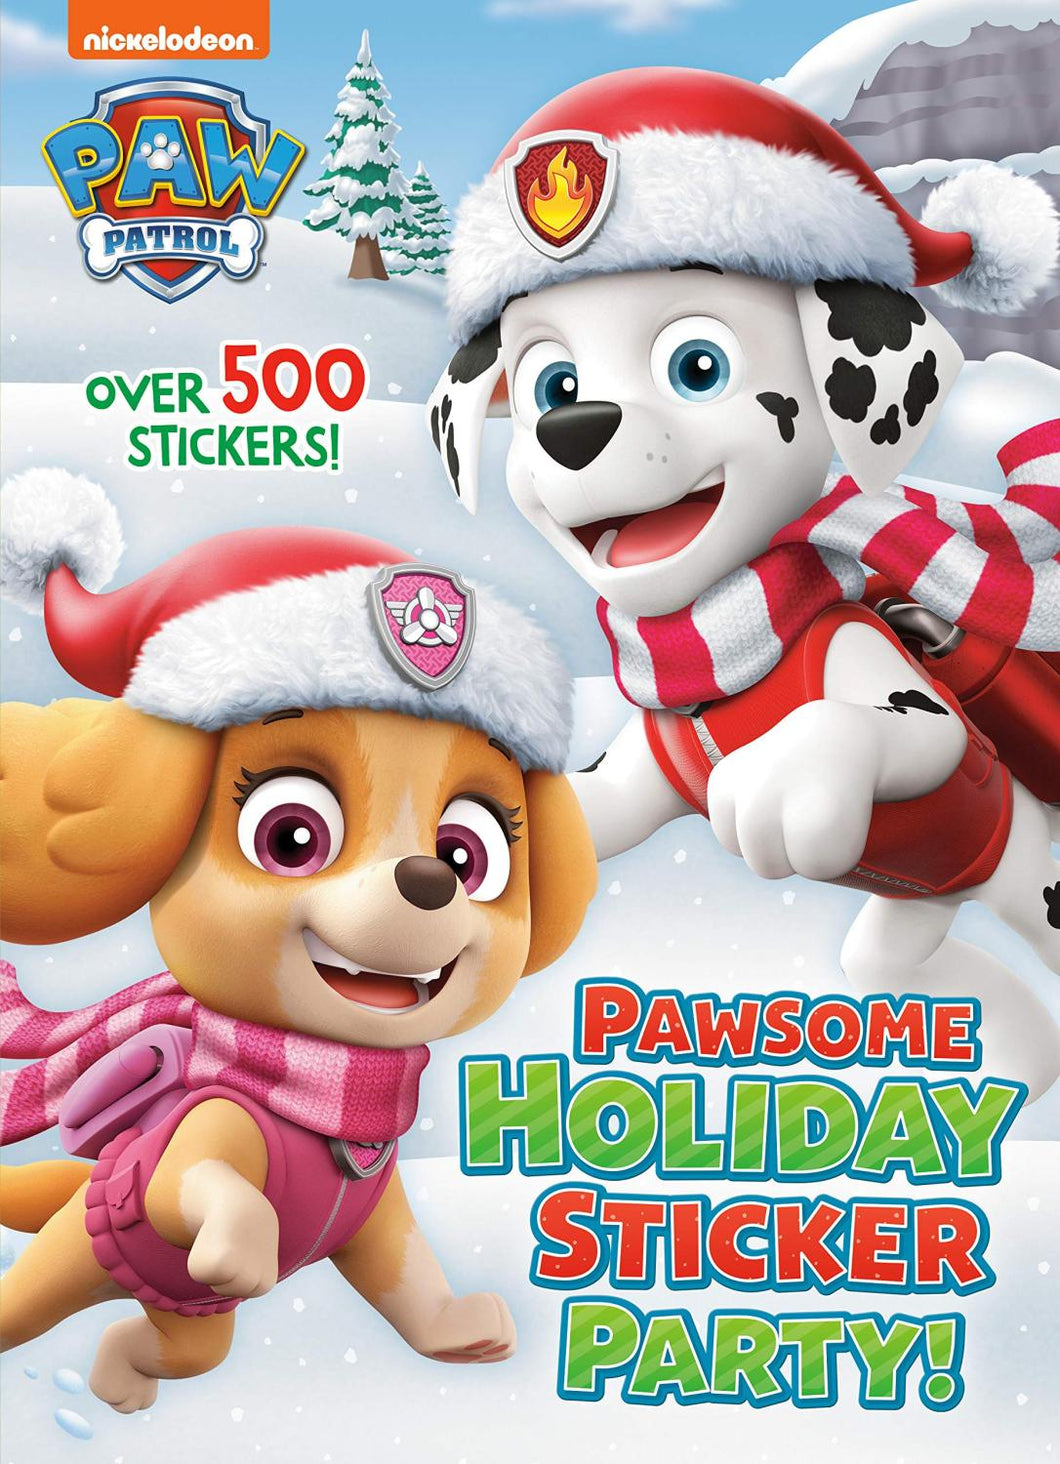 Pawsome Holiday Sticker Party